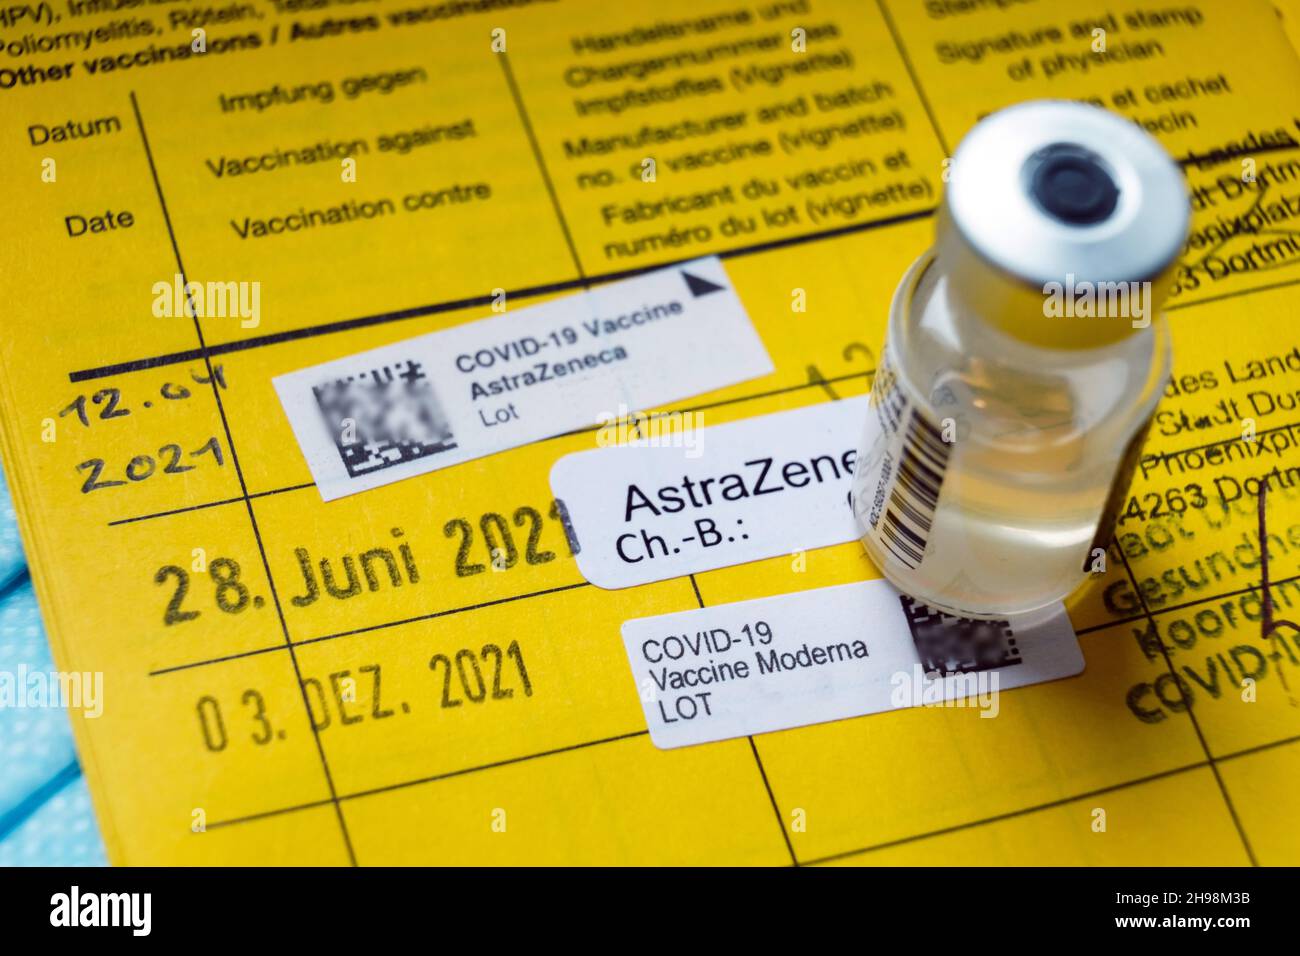 german vaccination card with the note of three vaccinations against Covid-19, booster vaccination - December 5, 2021   ---   Impfausweis mit dem Eintrag von drei Impfungen gegen Covid-19, Booster-Impfung - 5.12.2021 Stock Photo